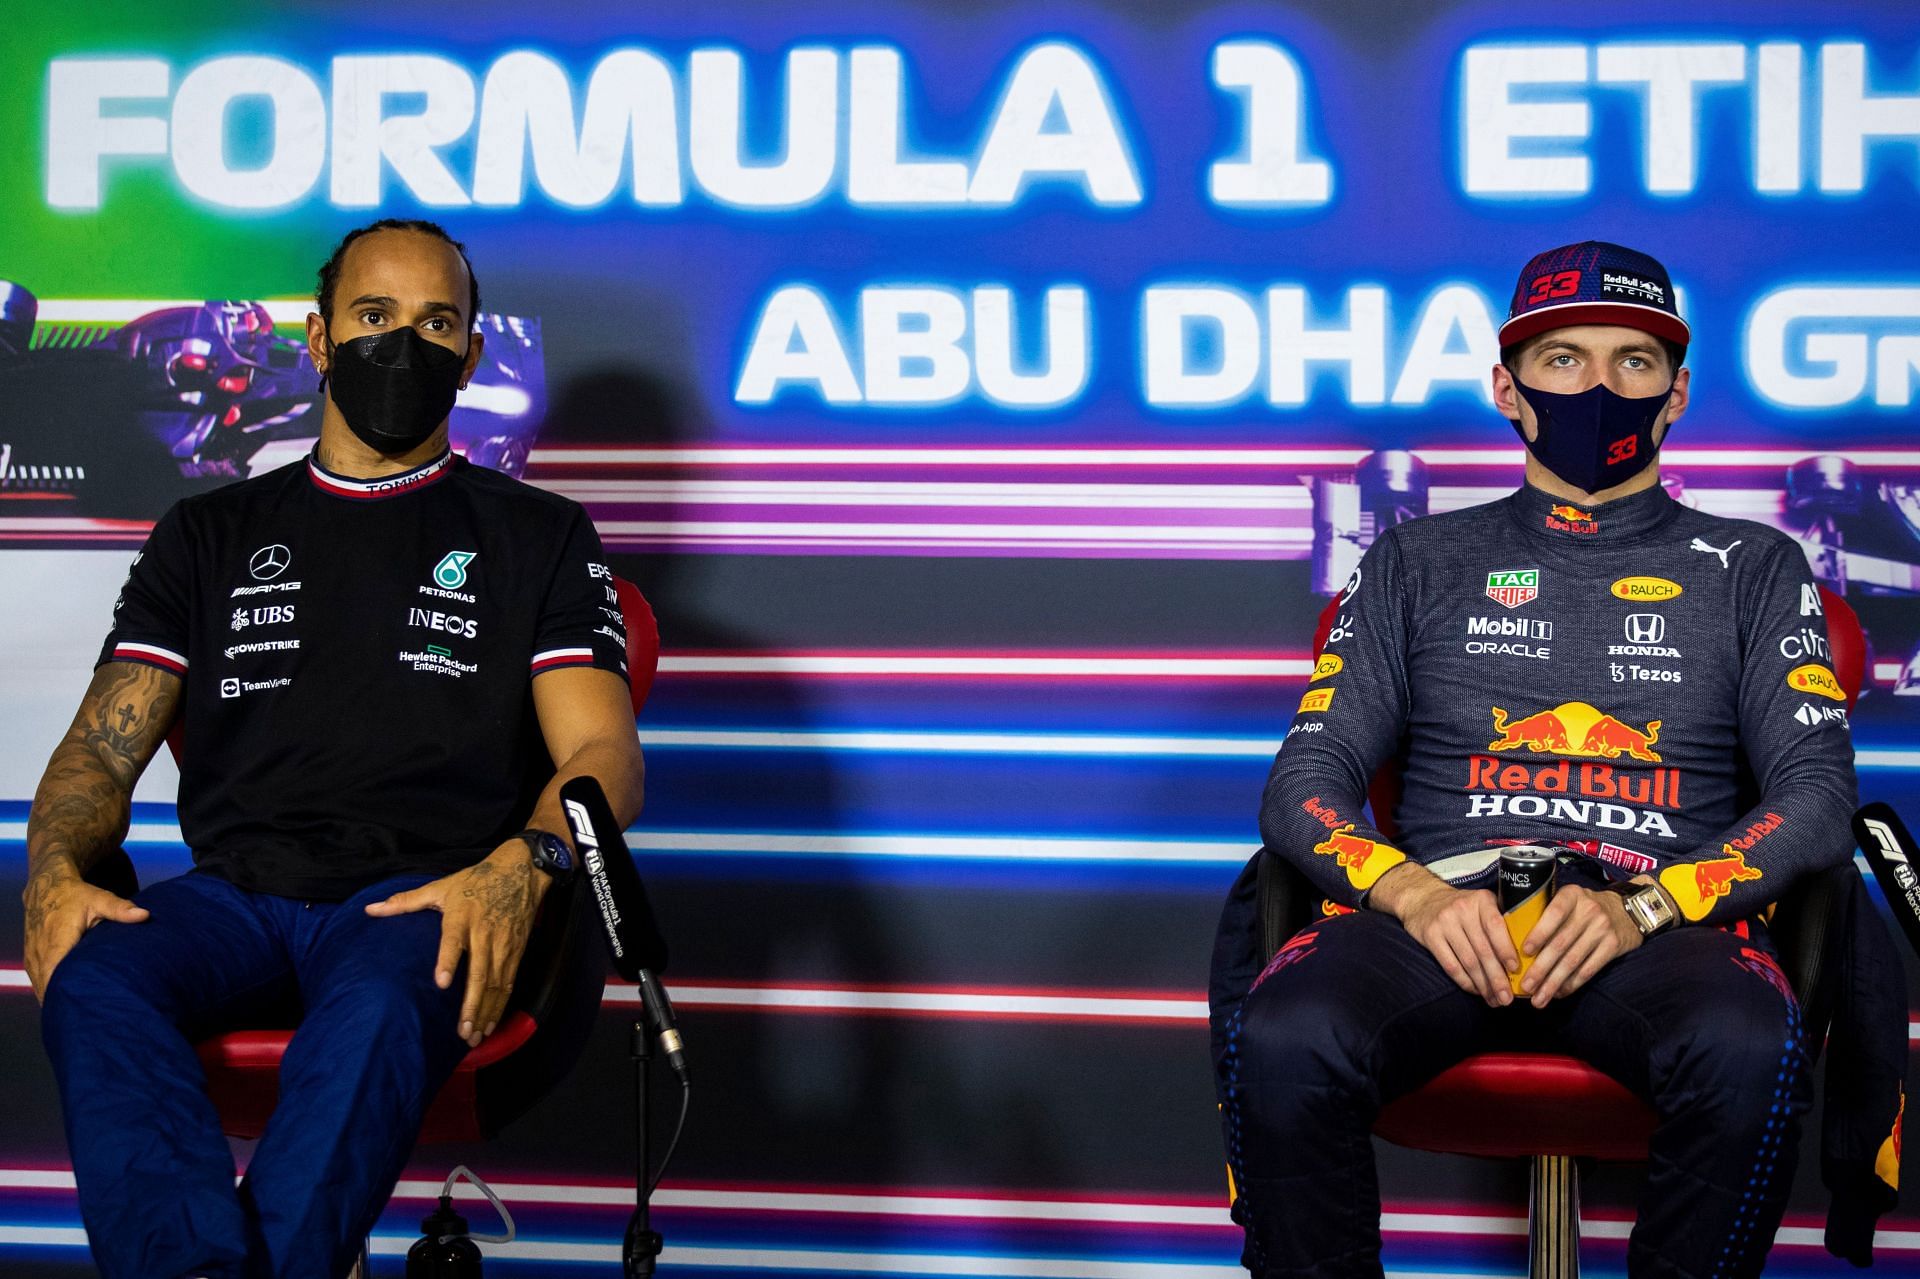 Lewis Hamilton and Max Verstappen prior to the 2021 Abu Dhabi Grand Prix (Photo by Sam Bloxham - Pool/Getty Images)